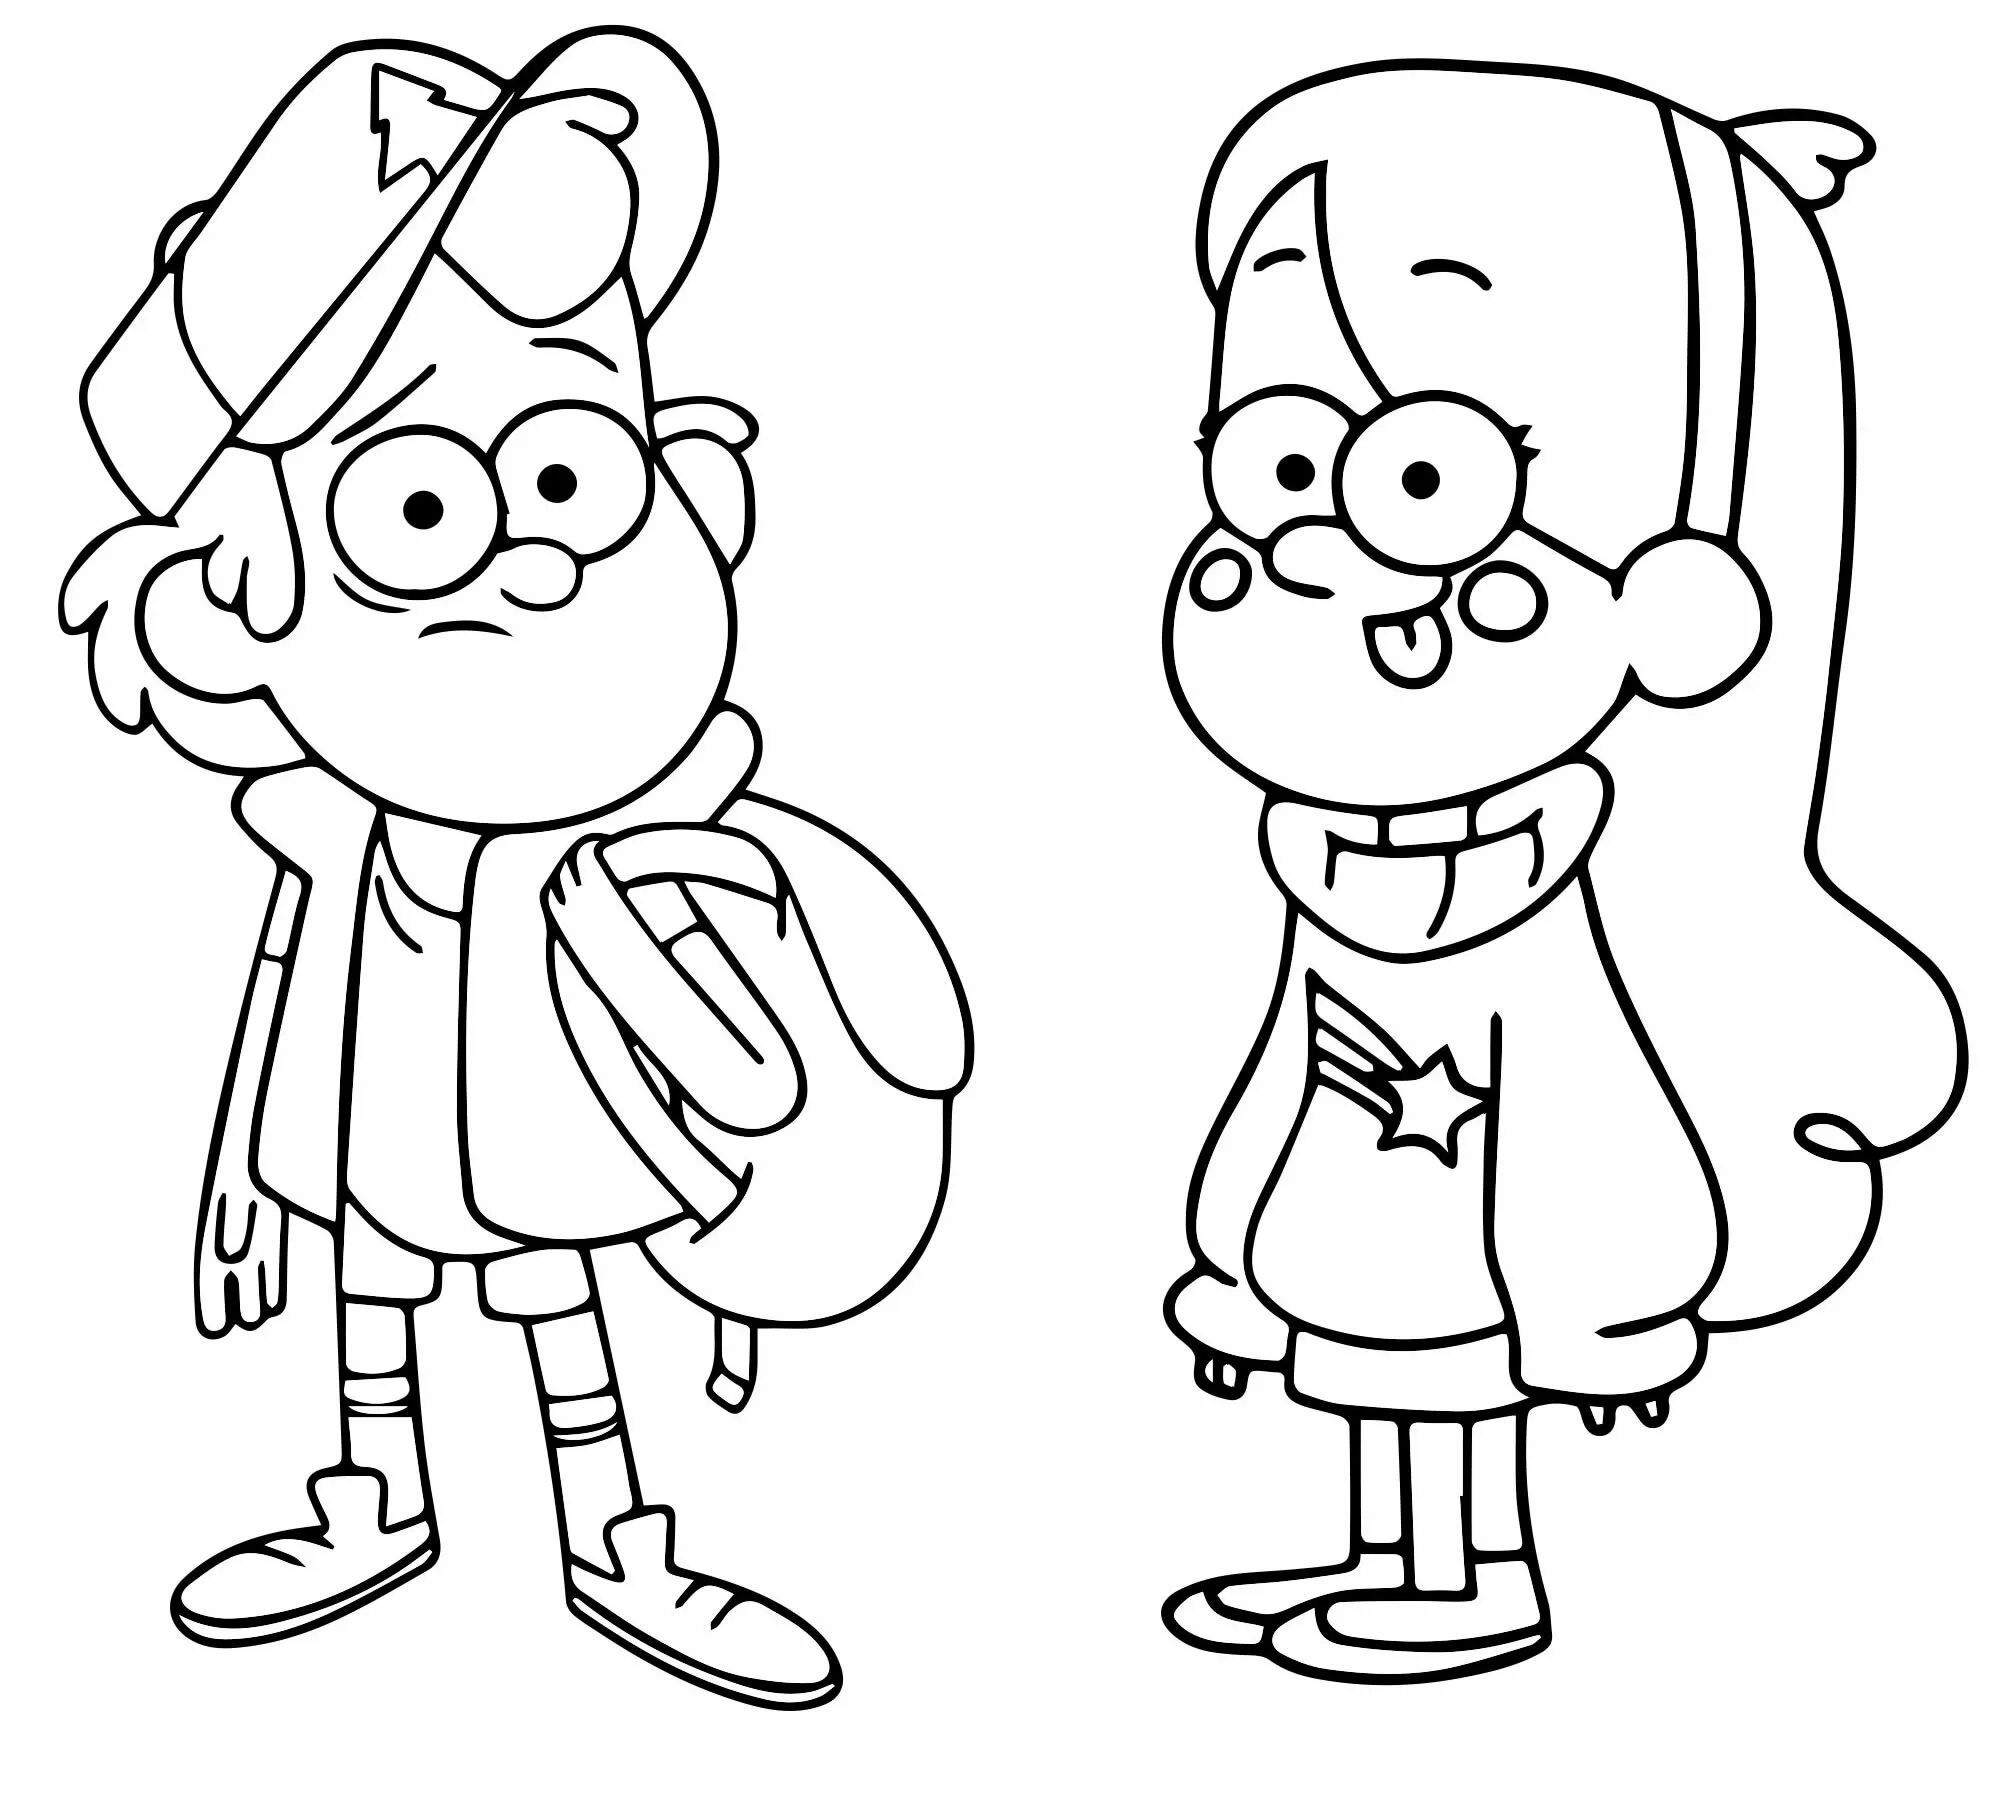 Fun coloring for dipper and mabel